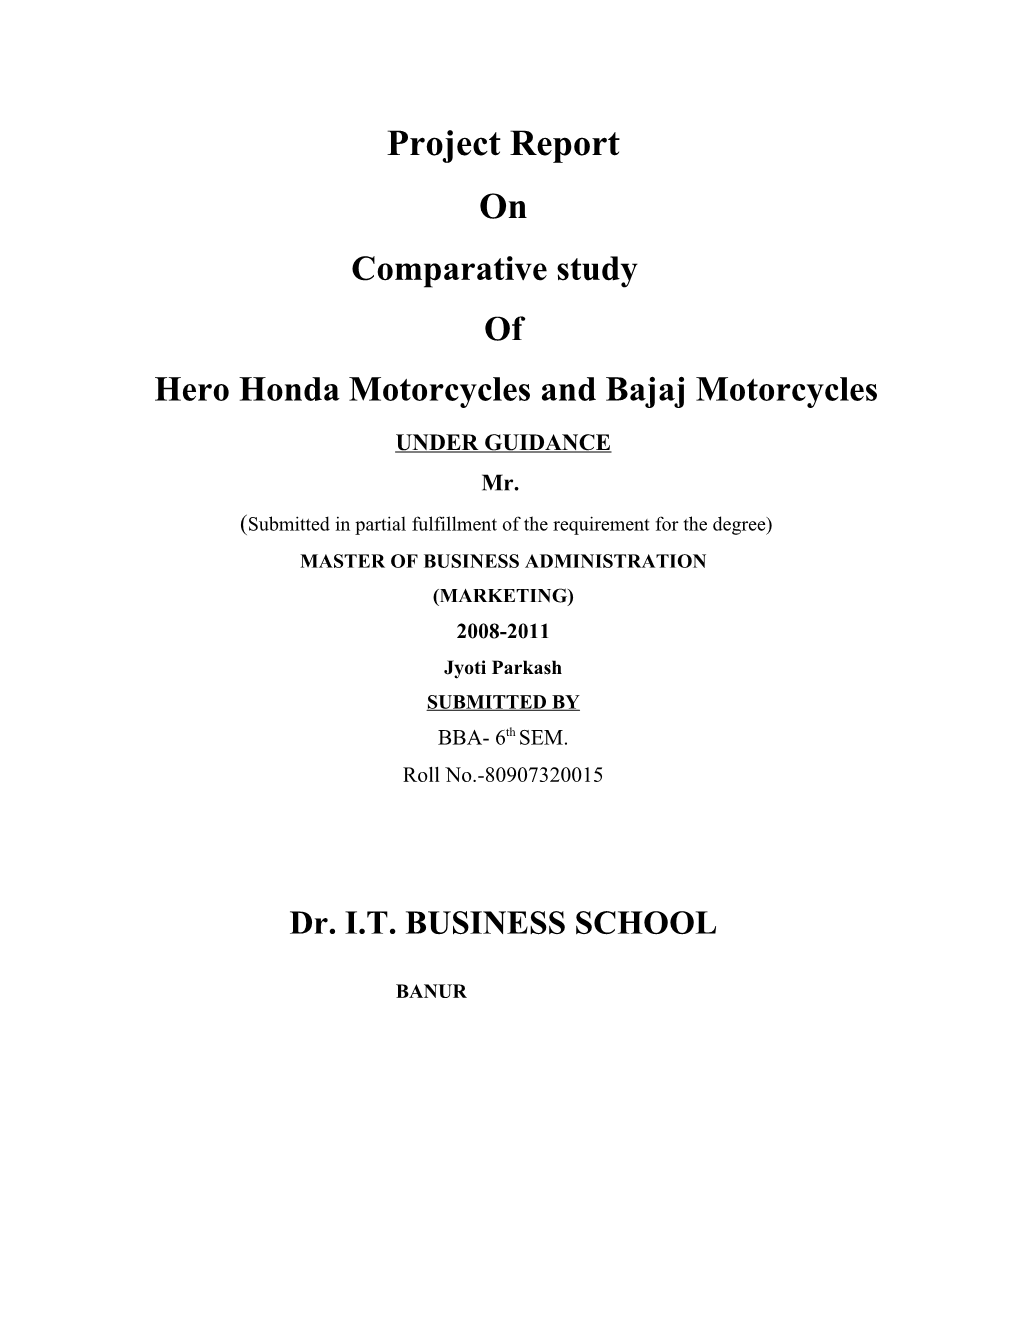 Project Report on Comparative Study of Hero Honda Motorcycles and Bajaj Motorcycles